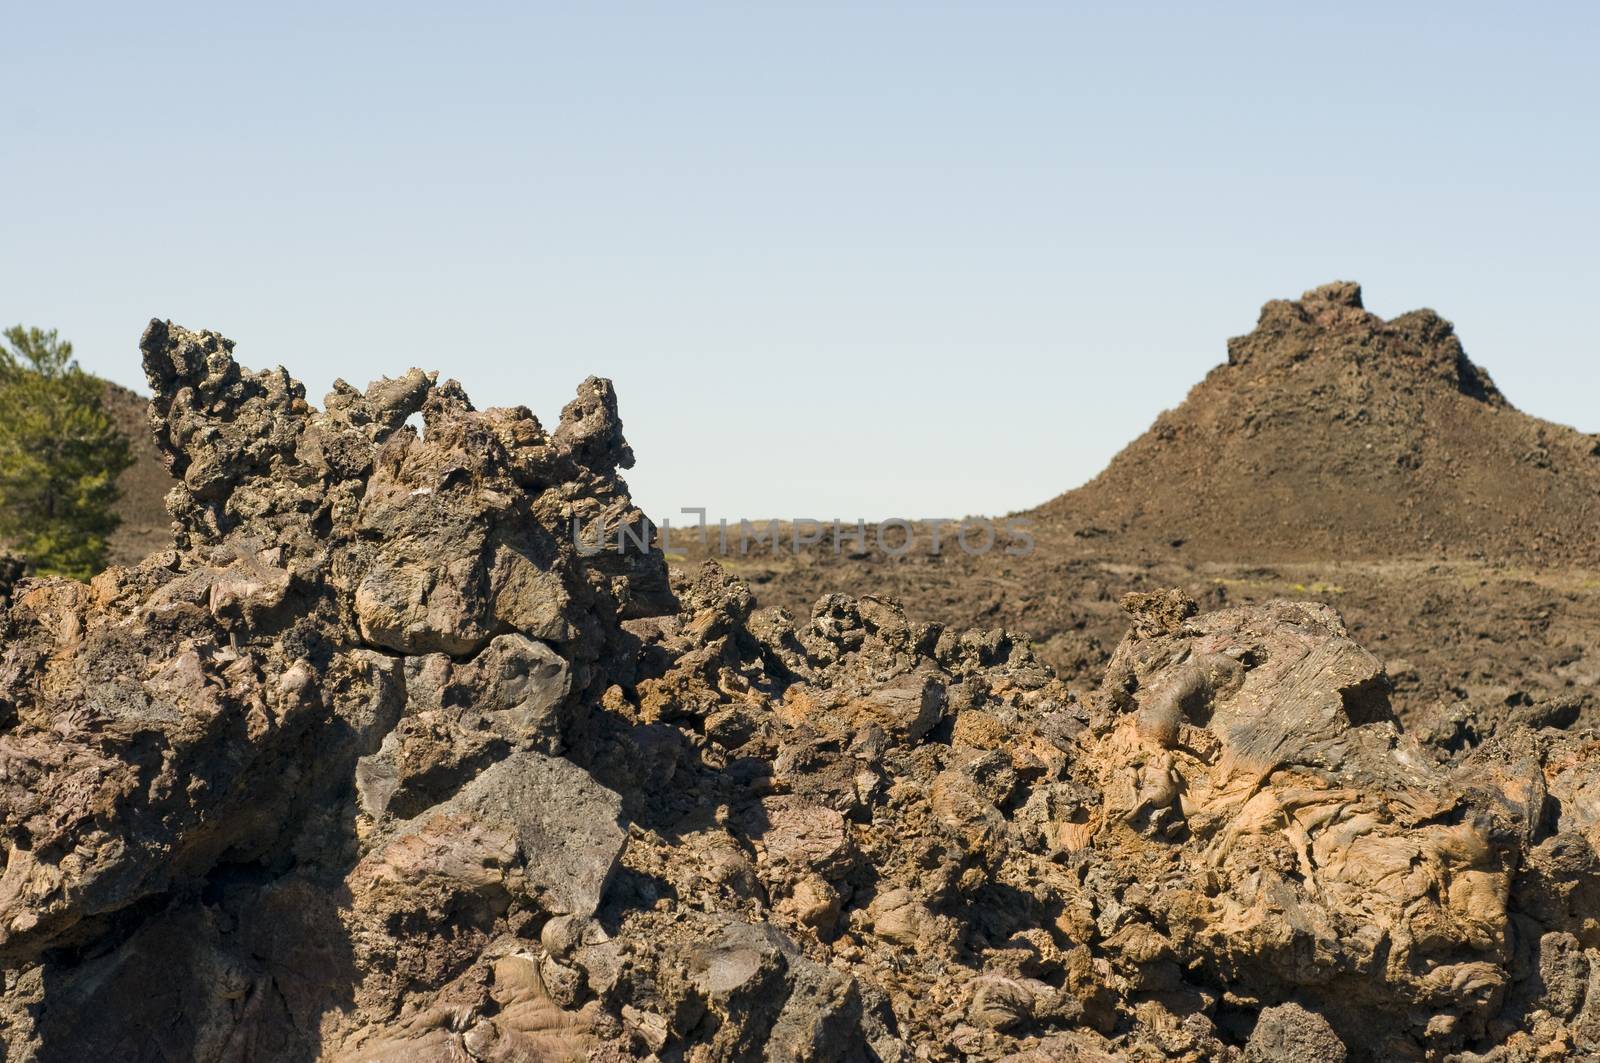 Block lava fragments and landscape of the Craters of the Moon Na by Njean